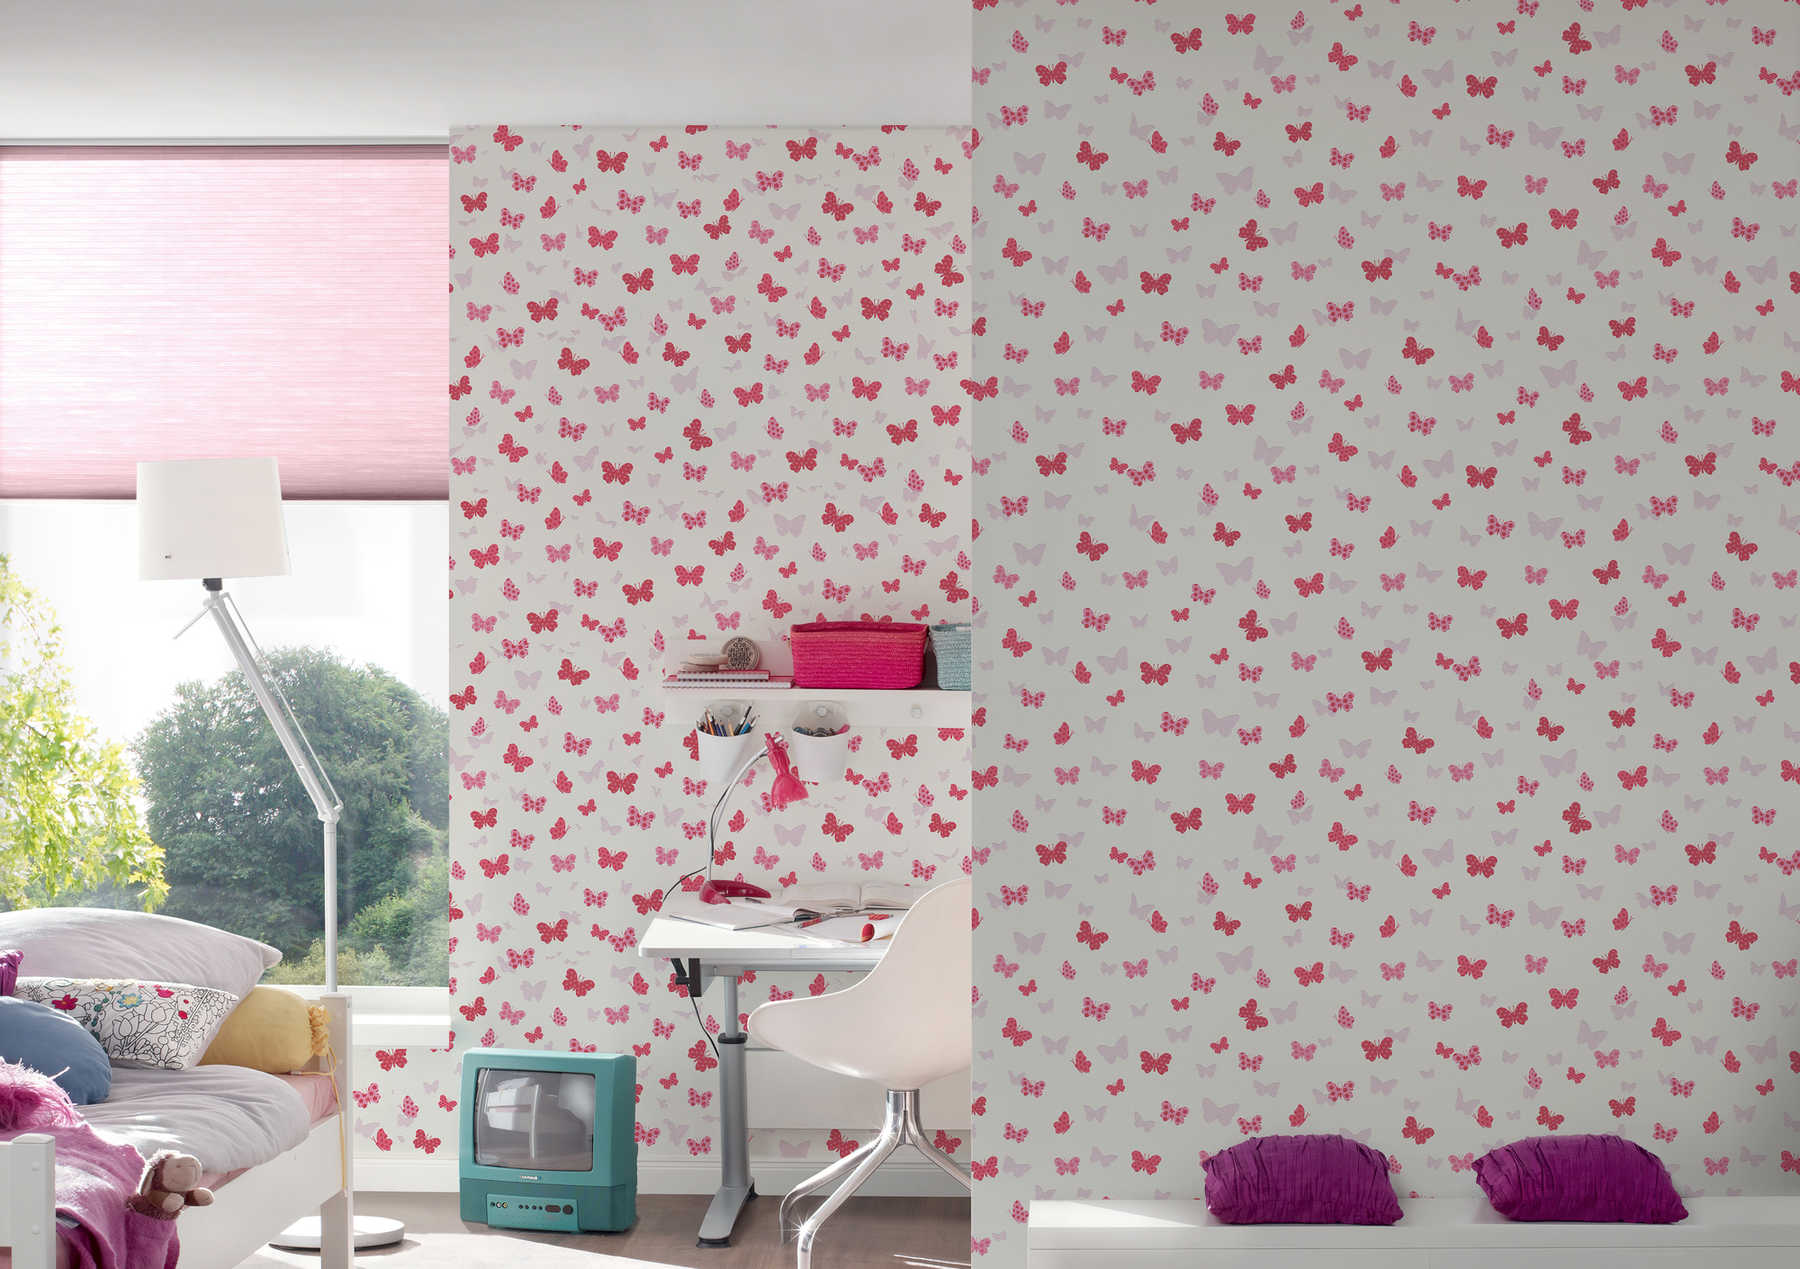             Butterfly wallpaper patterned for Nursery - white, red, pink
        